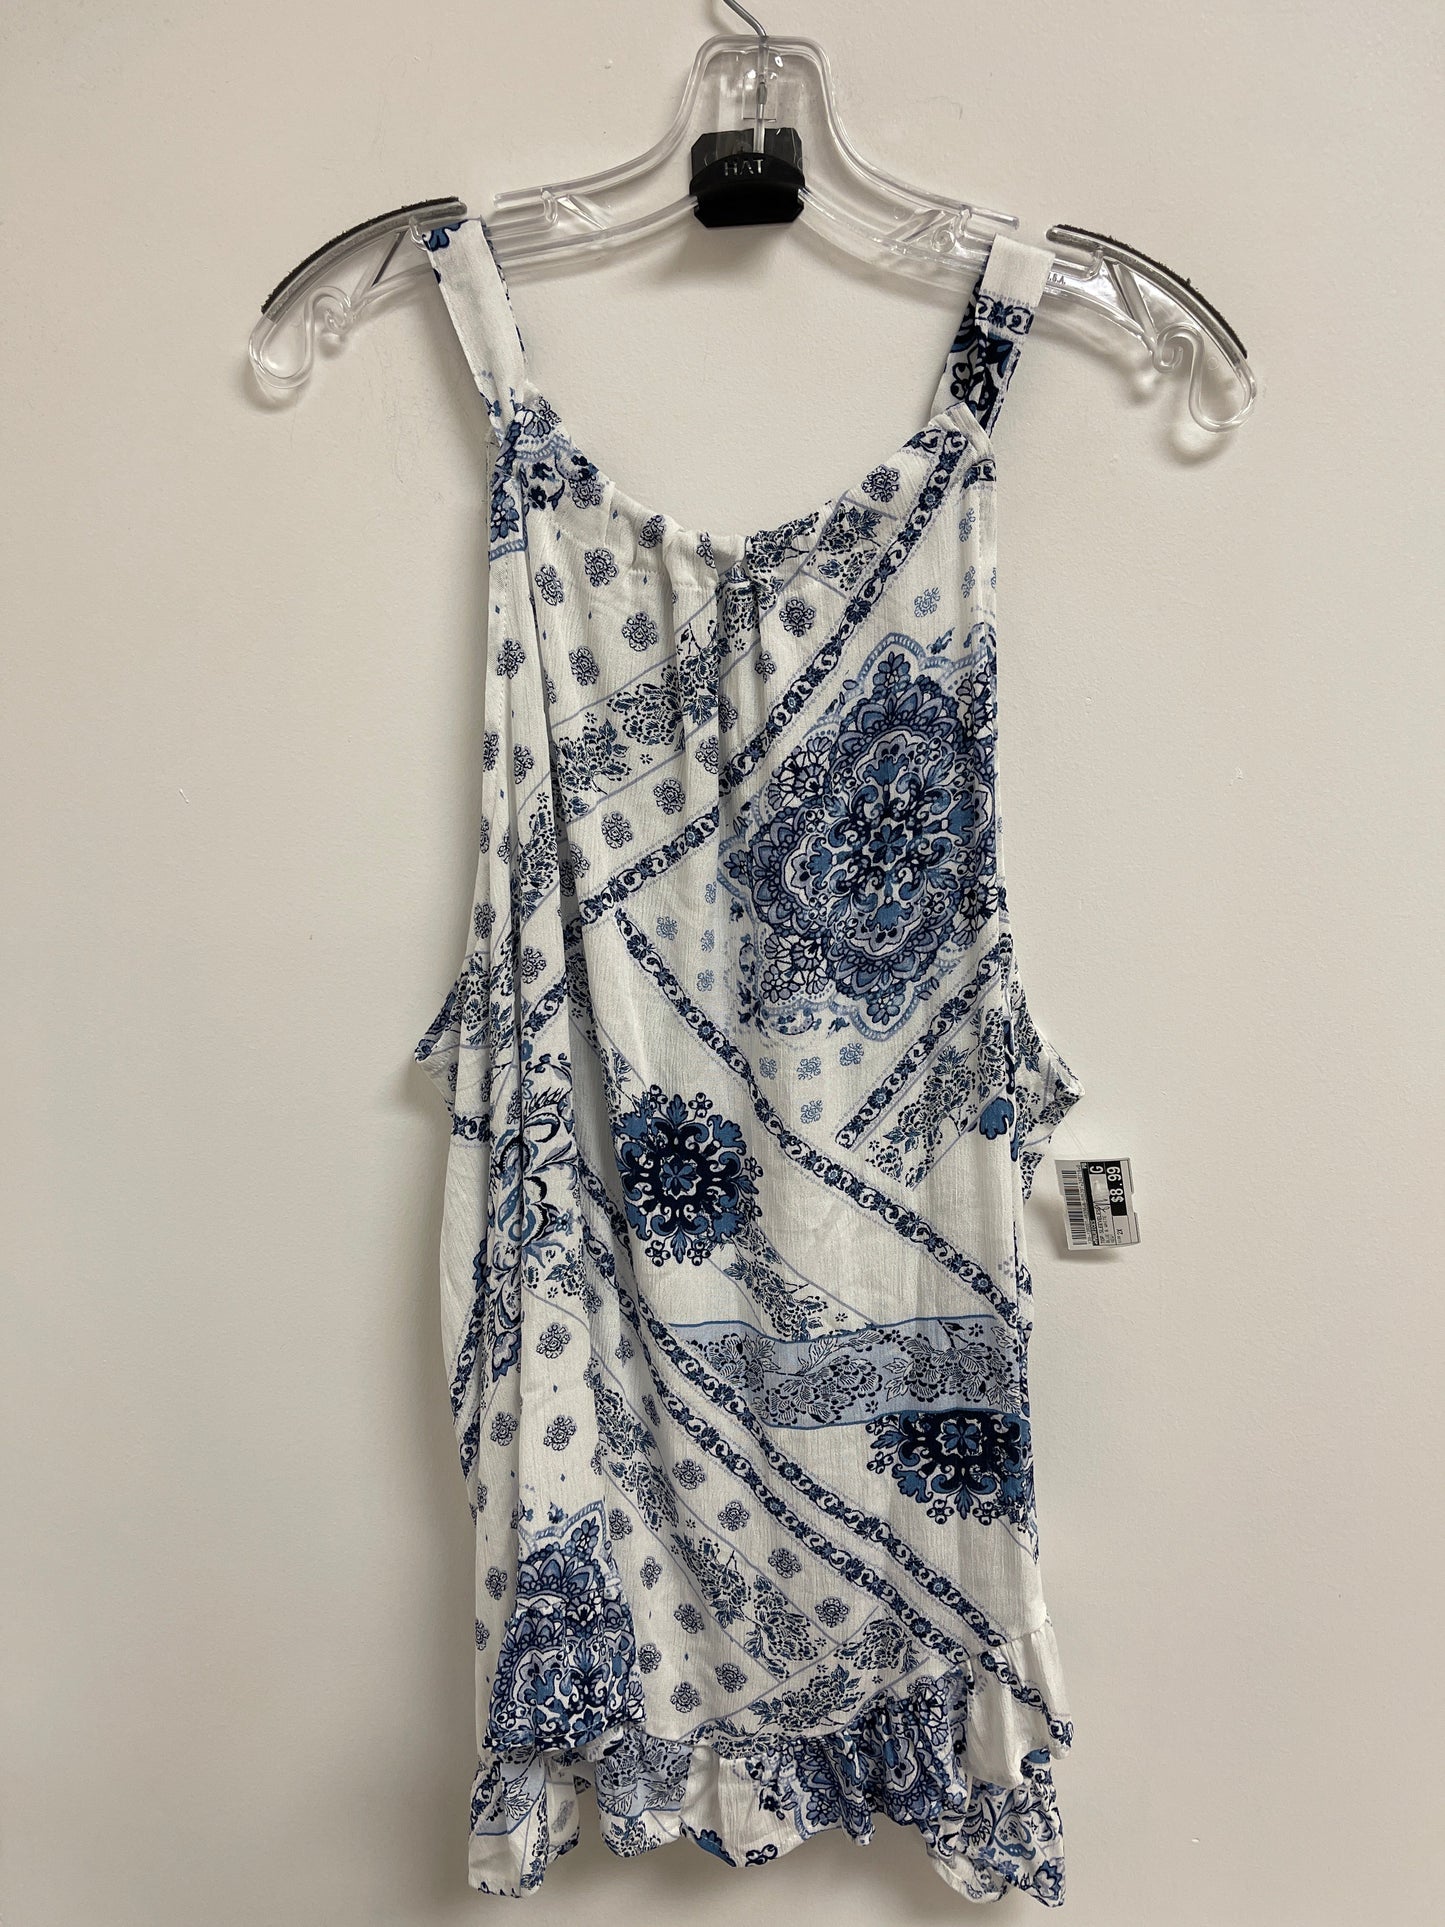 Blue & White Top Sleeveless Maurices, Size 2x